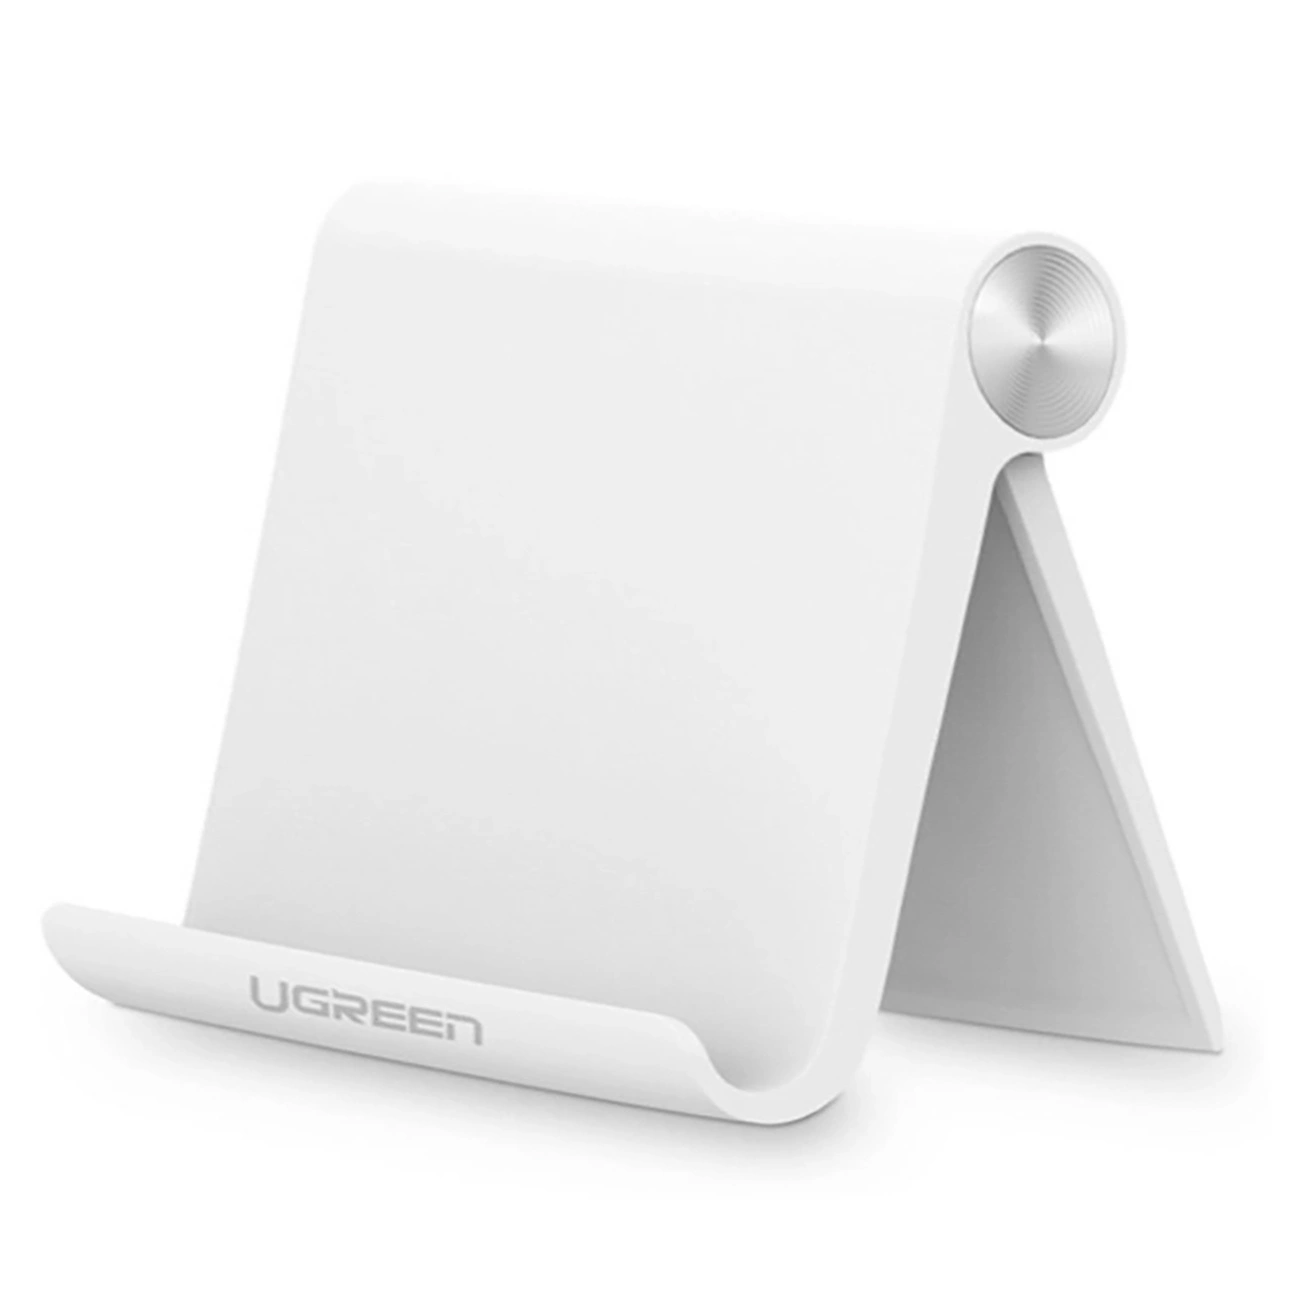 Ugreen LP115 desk stand on a white background